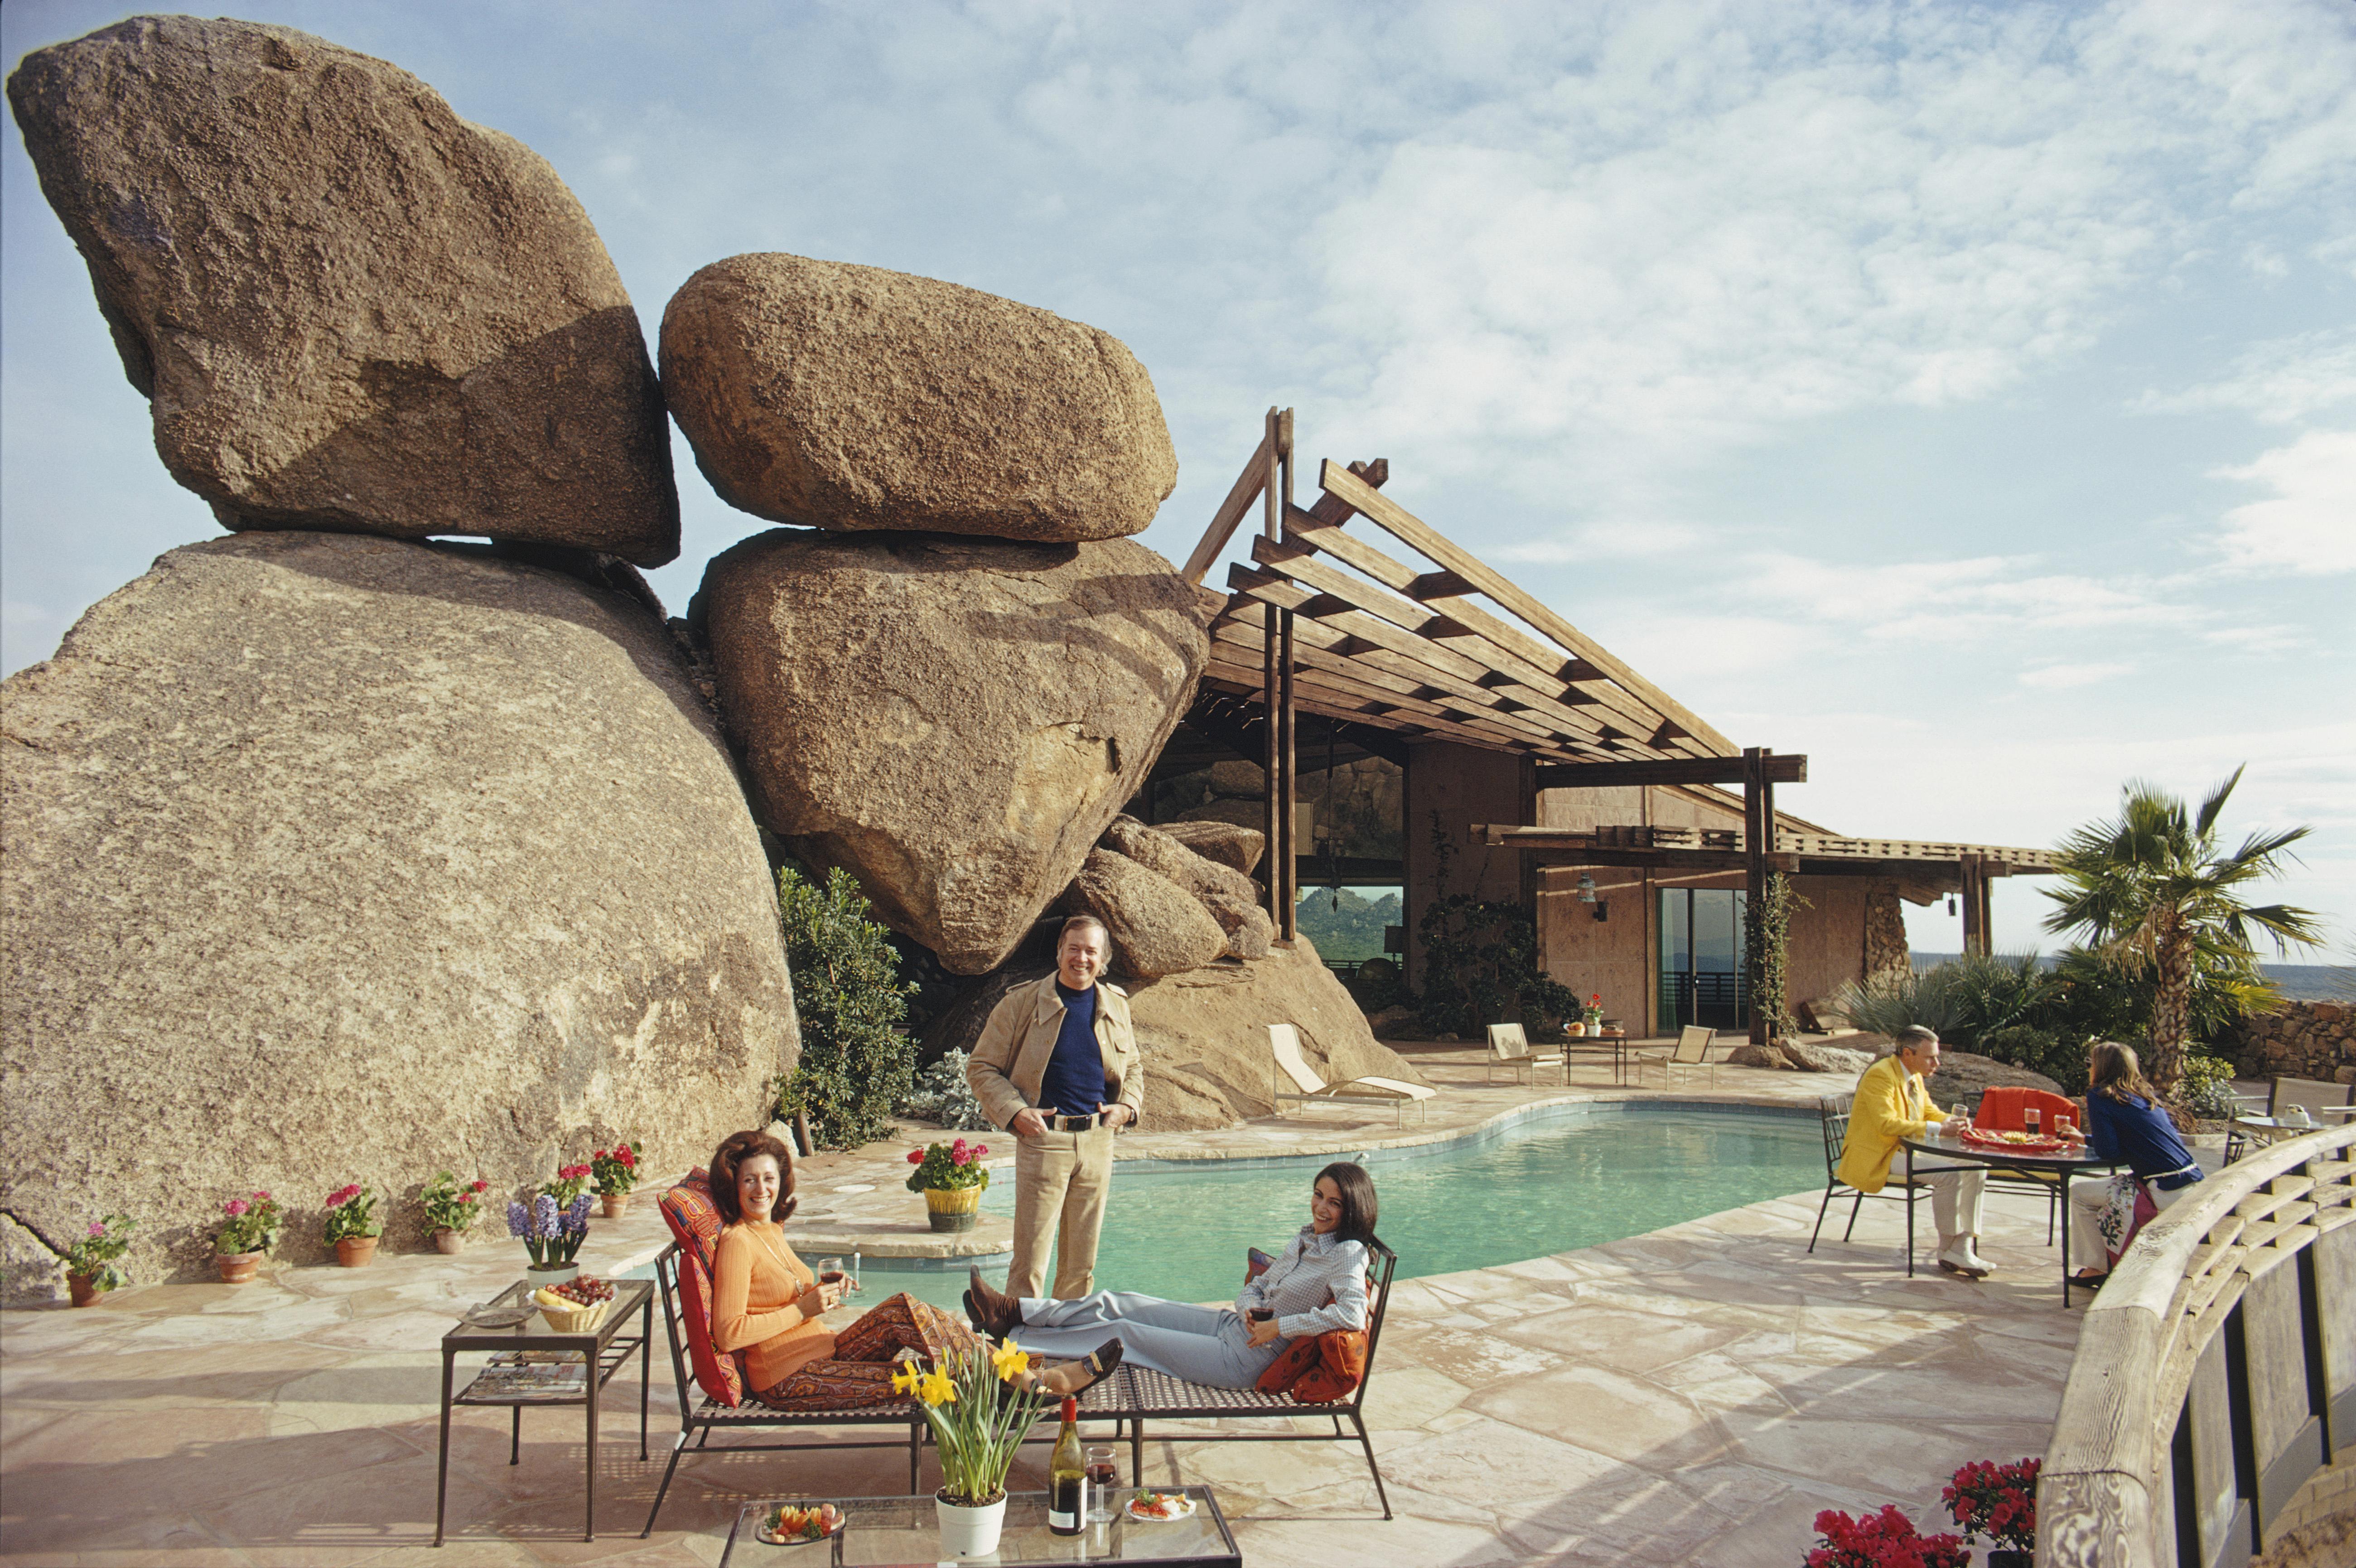 'Bouldereign' 1973 Slim Aarons Limited Estate Edition Print 

Carl Hovgard's home, Bouldereign in Carefree, Arizona, built around the boulders on a desert site, January 1973.

Produced from the original transparency
Certificate of authenticity